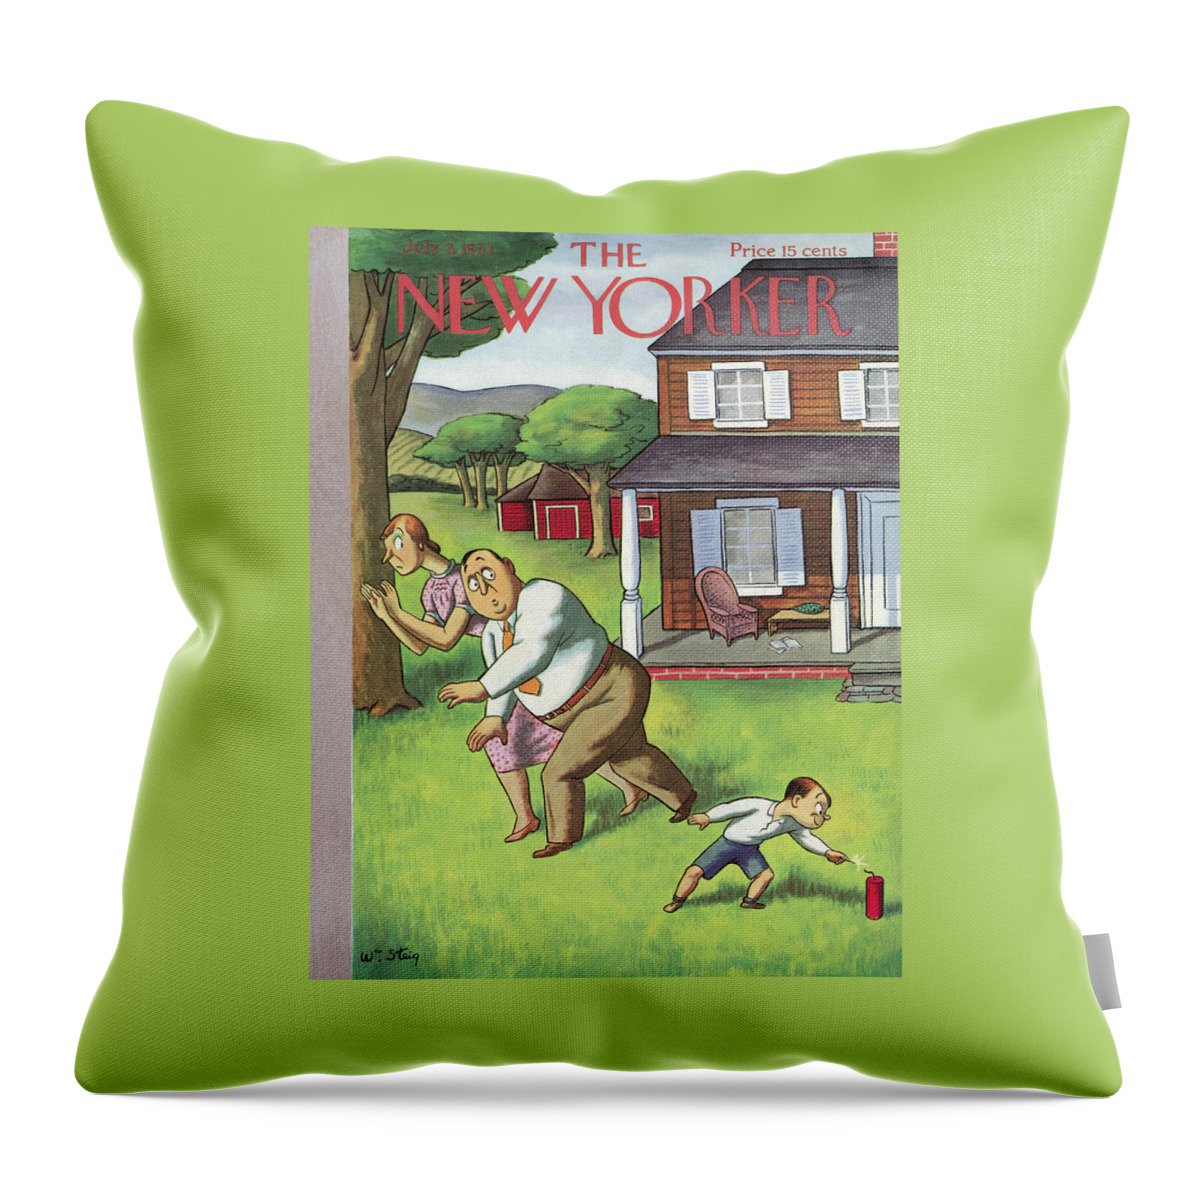 New Yorker July 3, 1937 Throw Pillow